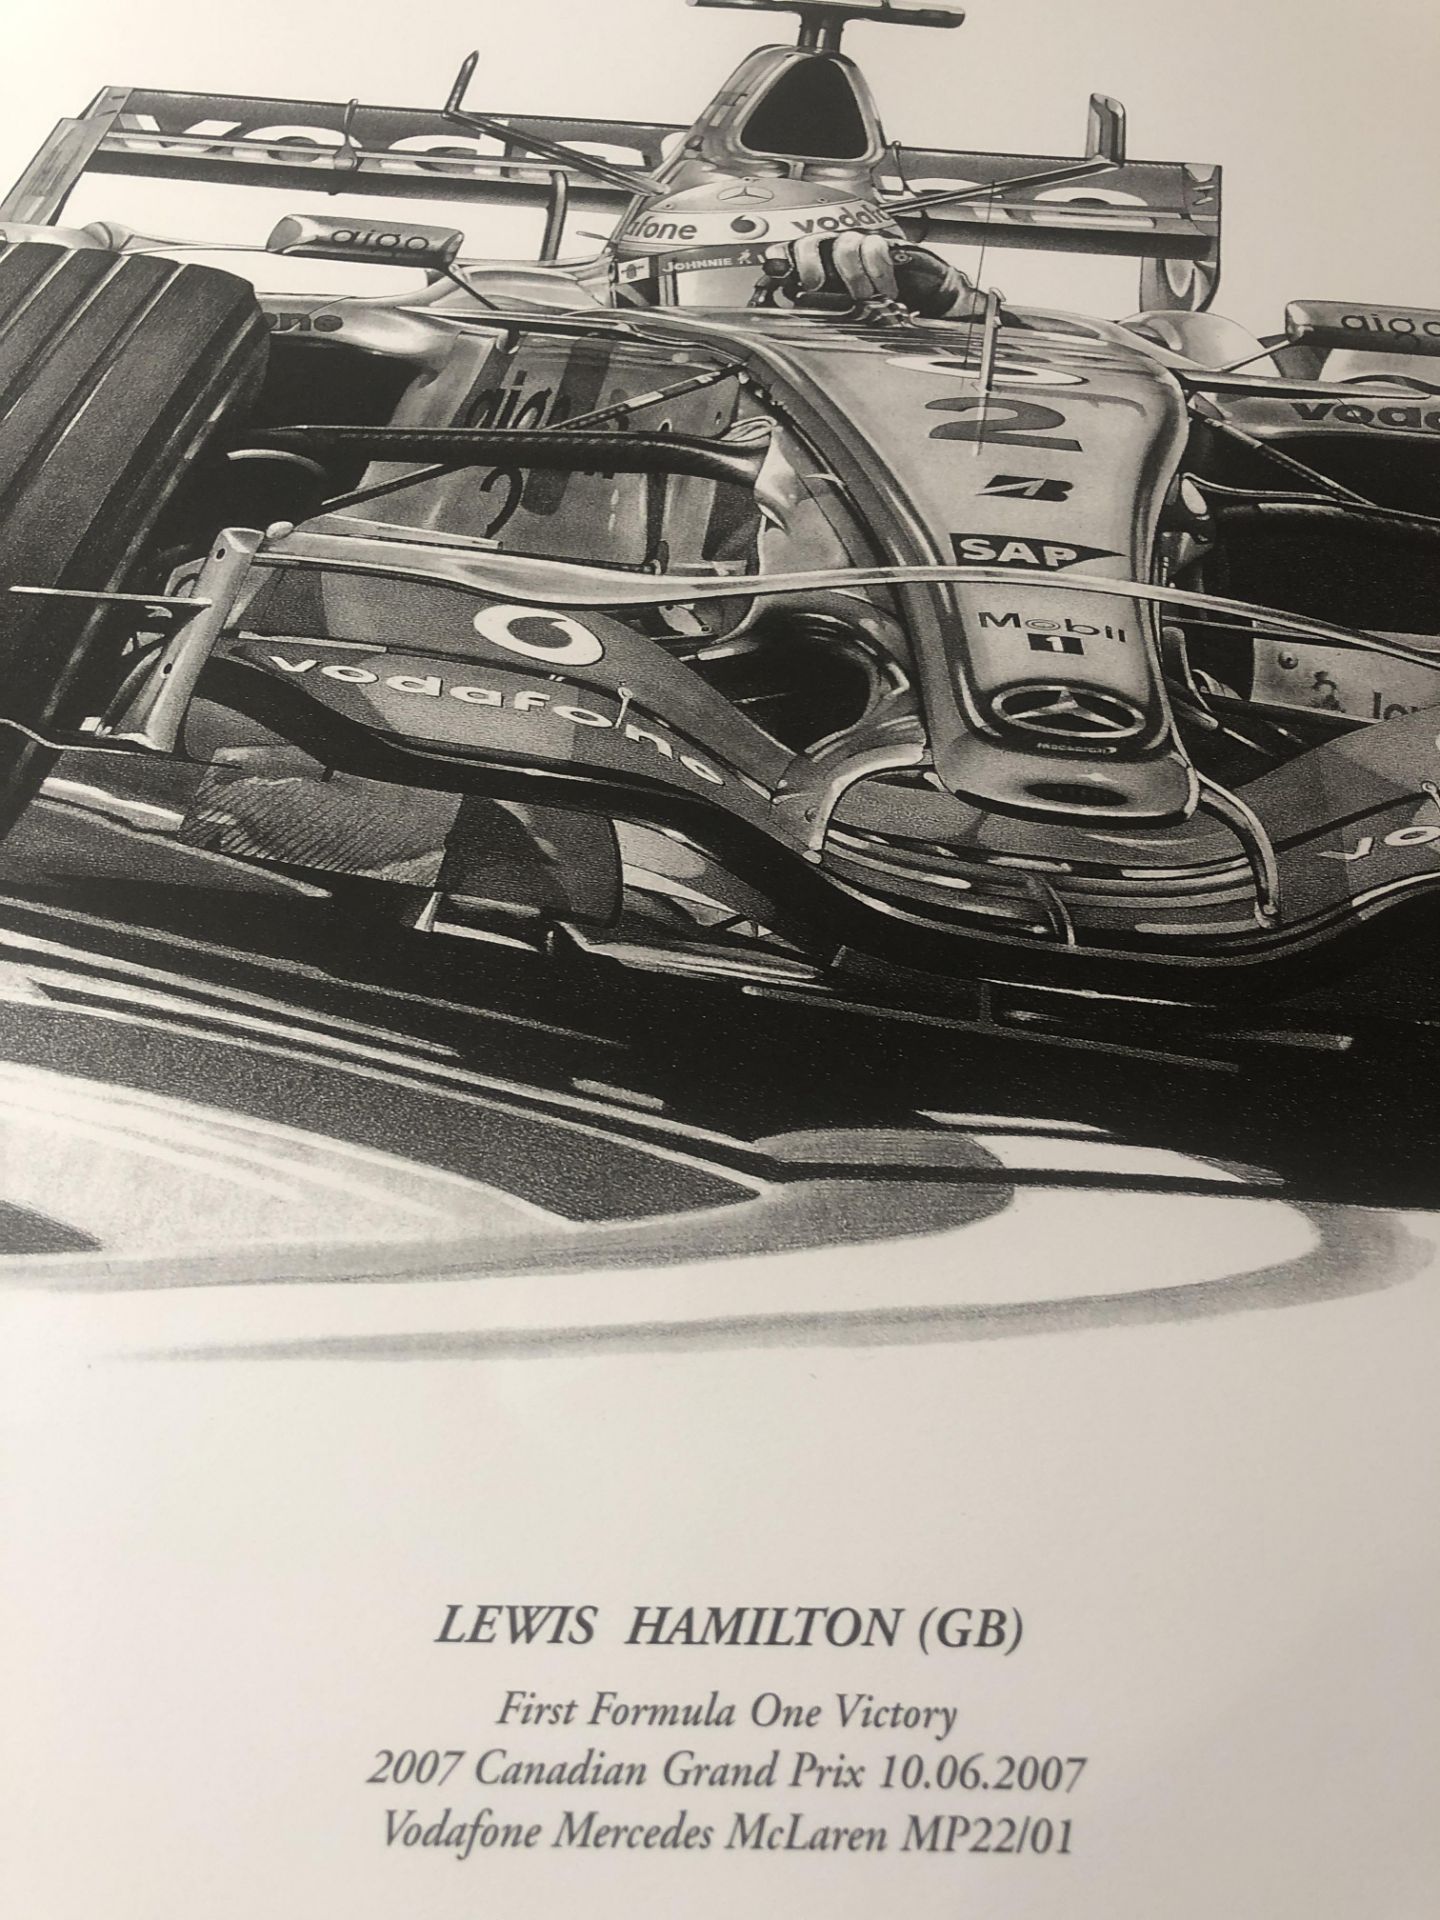 Alan Stammers Signed Artist Proof of Lewis Hamilton - Image 3 of 5